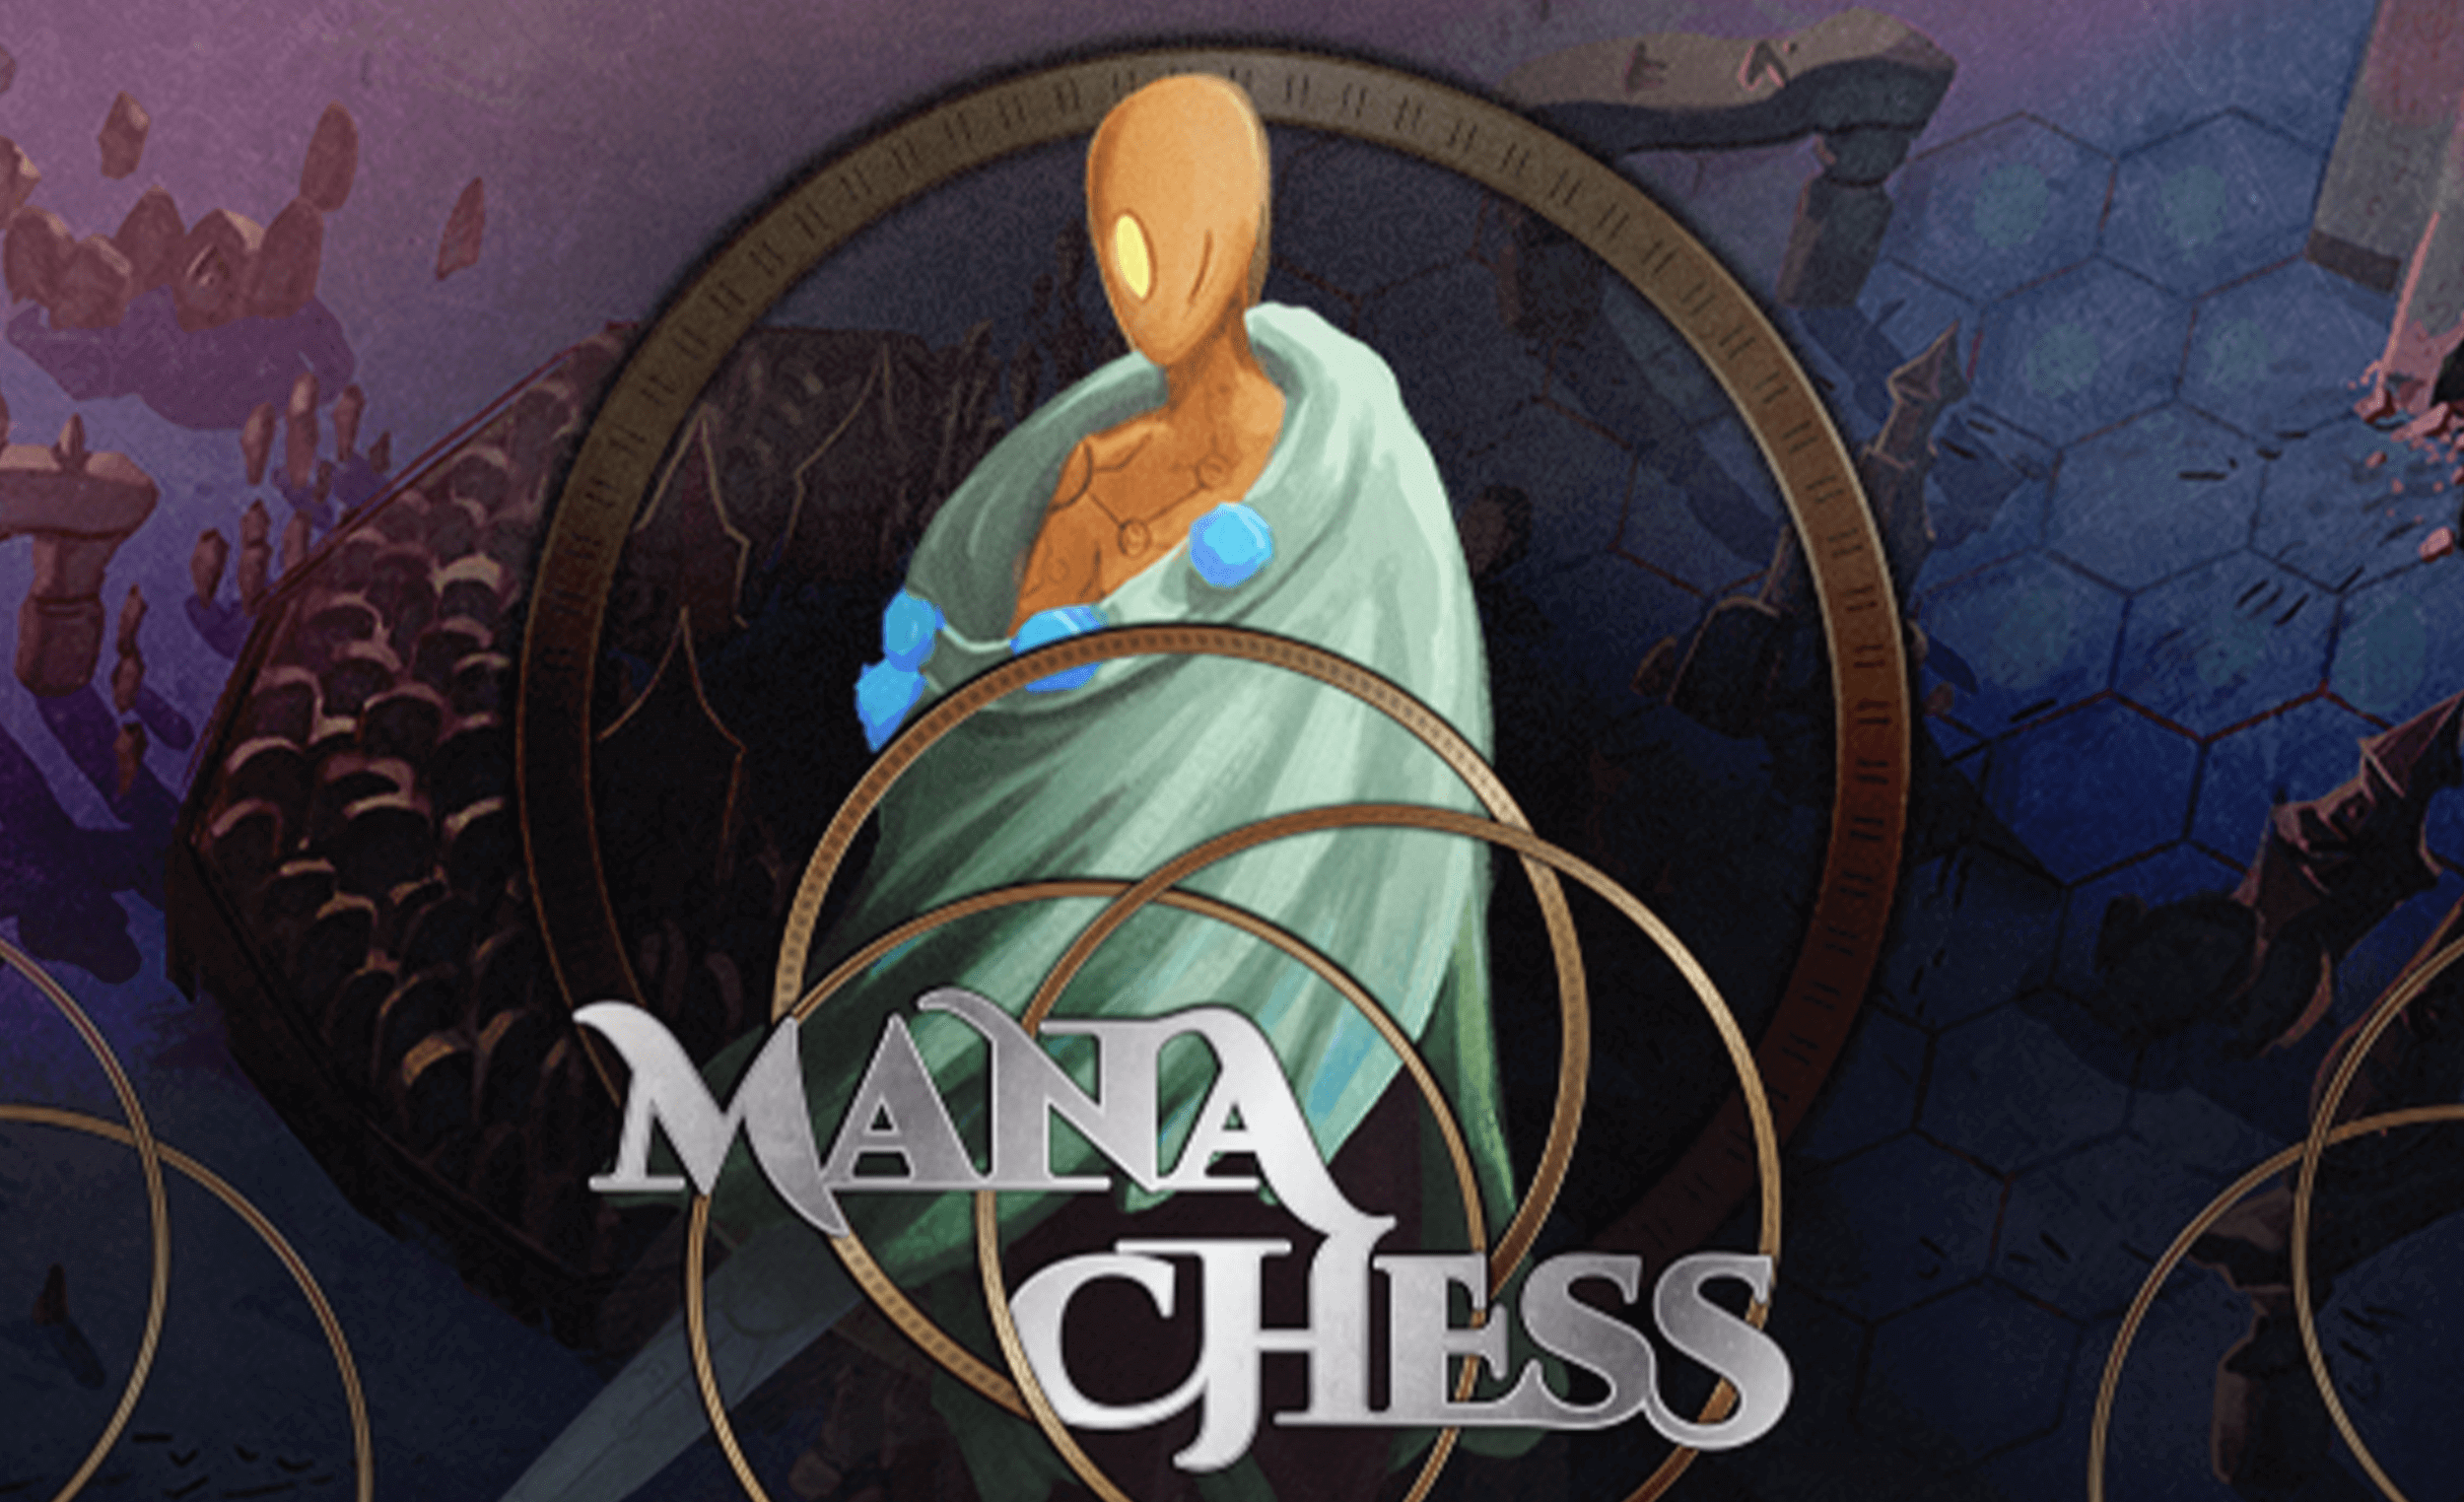 Mana Chess logo with main character illustration behind it, various gold rings are intertwined, sitting on top of an image pulled from the game itself